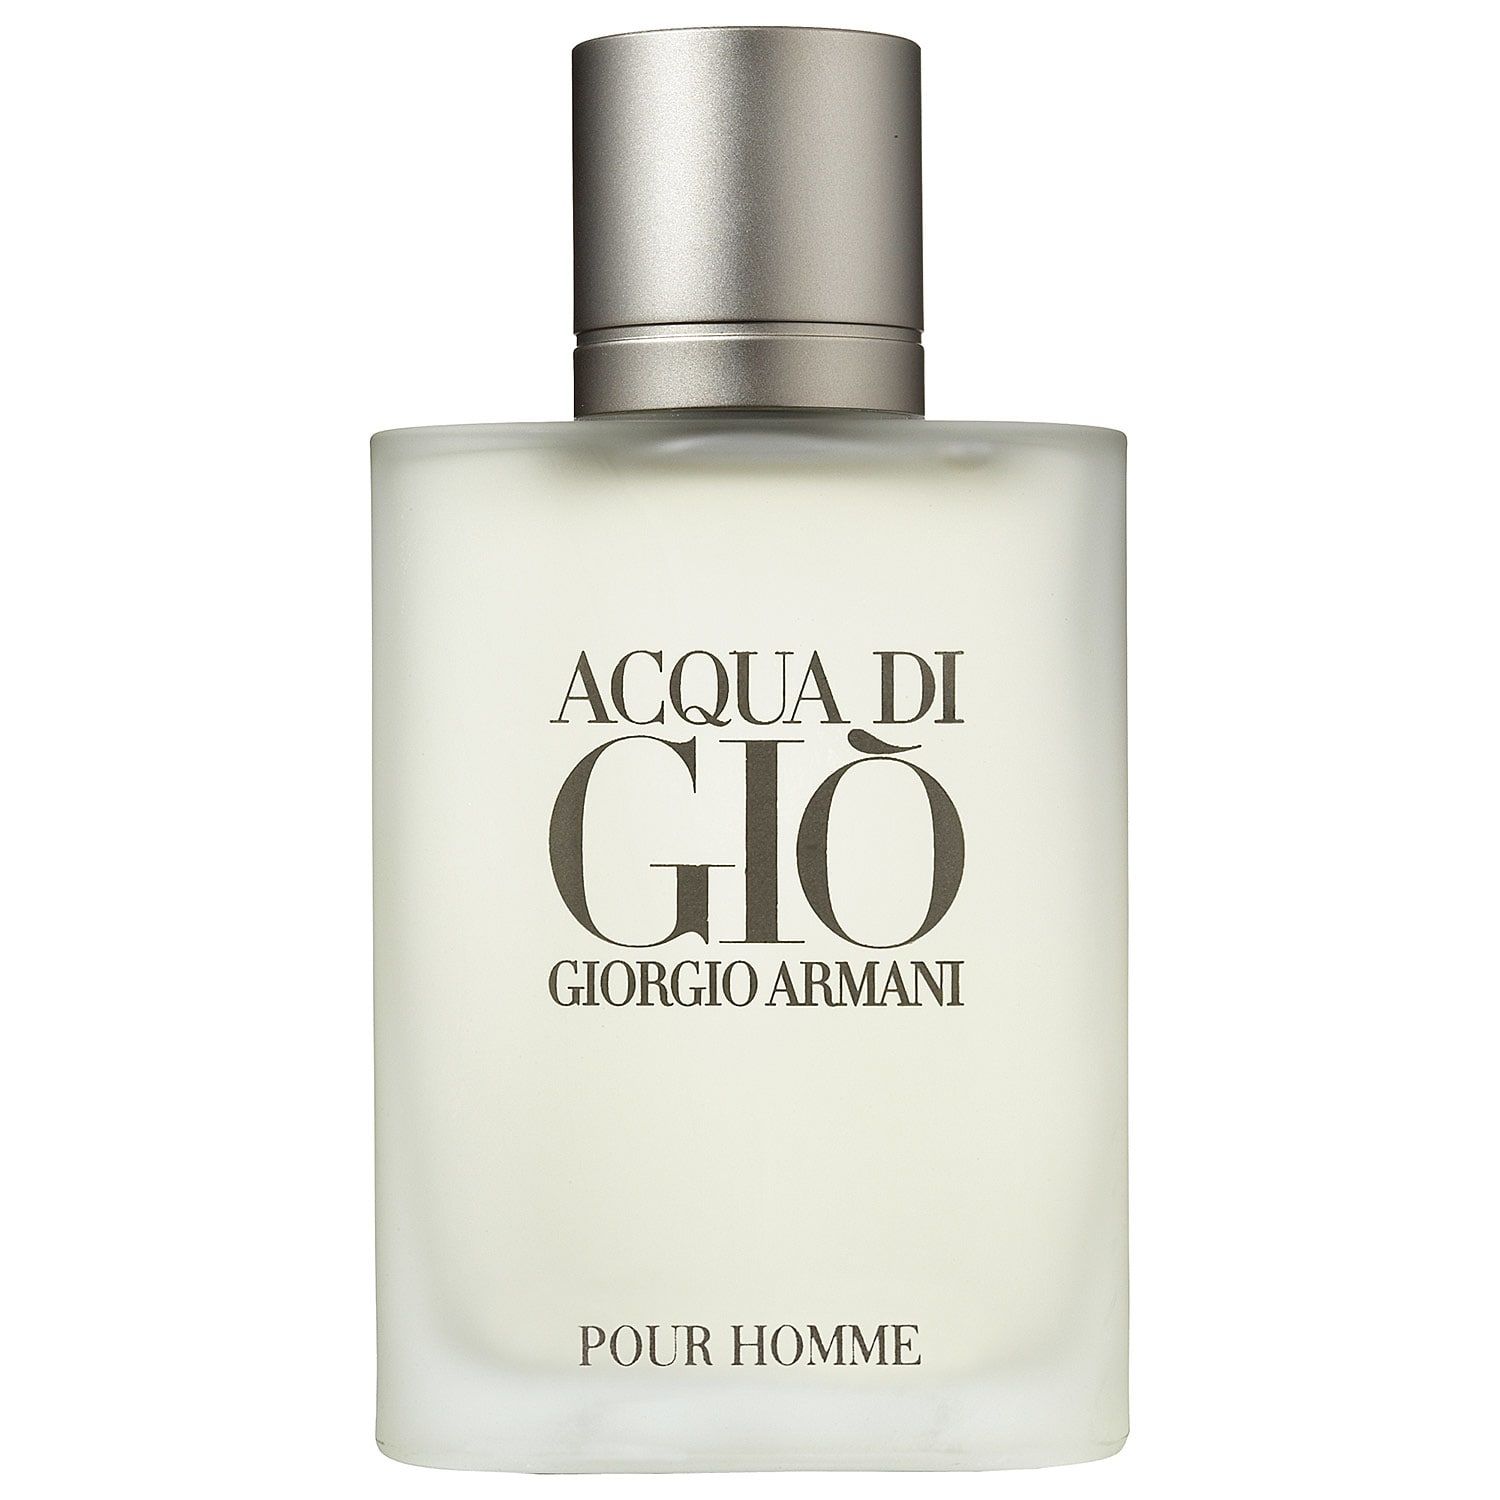 Poll womens cologne favorite mens Poll: Colognes